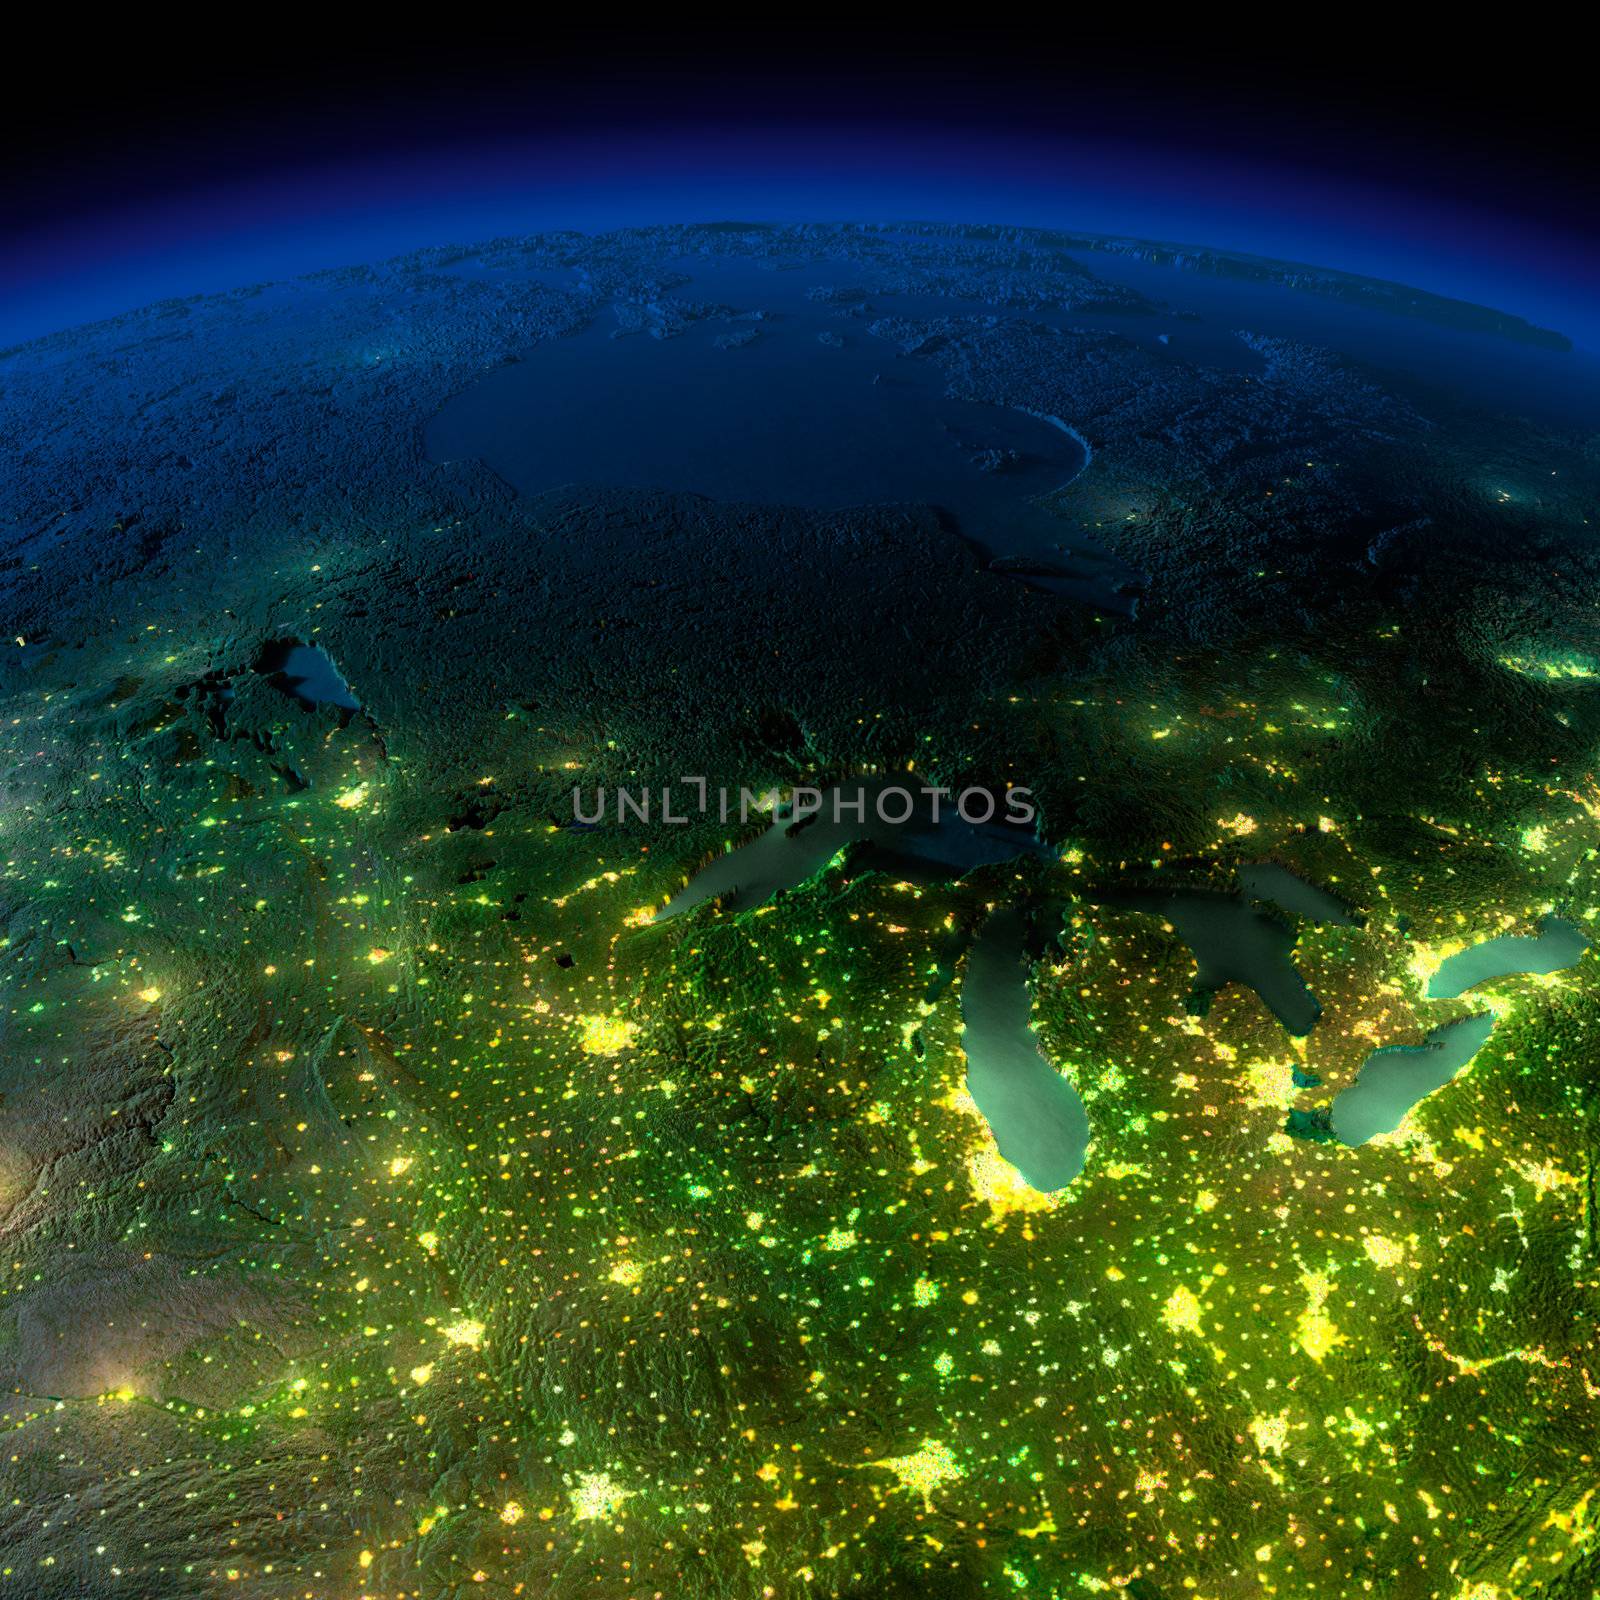 Night Earth. A piece of America - the northern U.S. states by Antartis